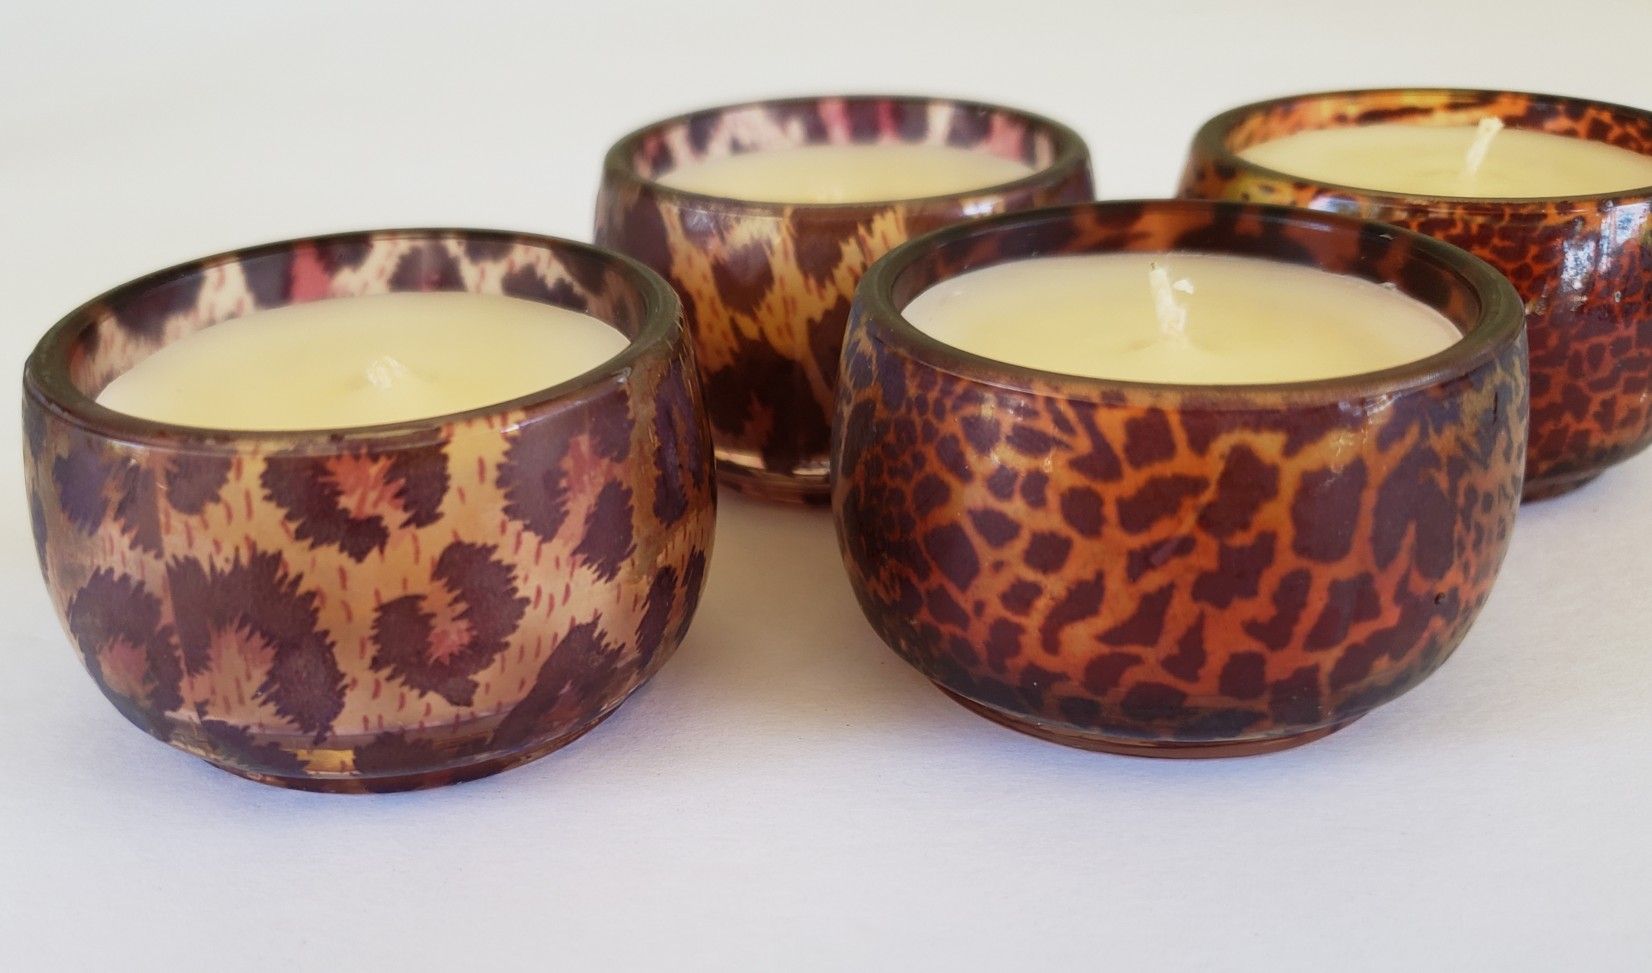 Leopard animal print glass candle holders